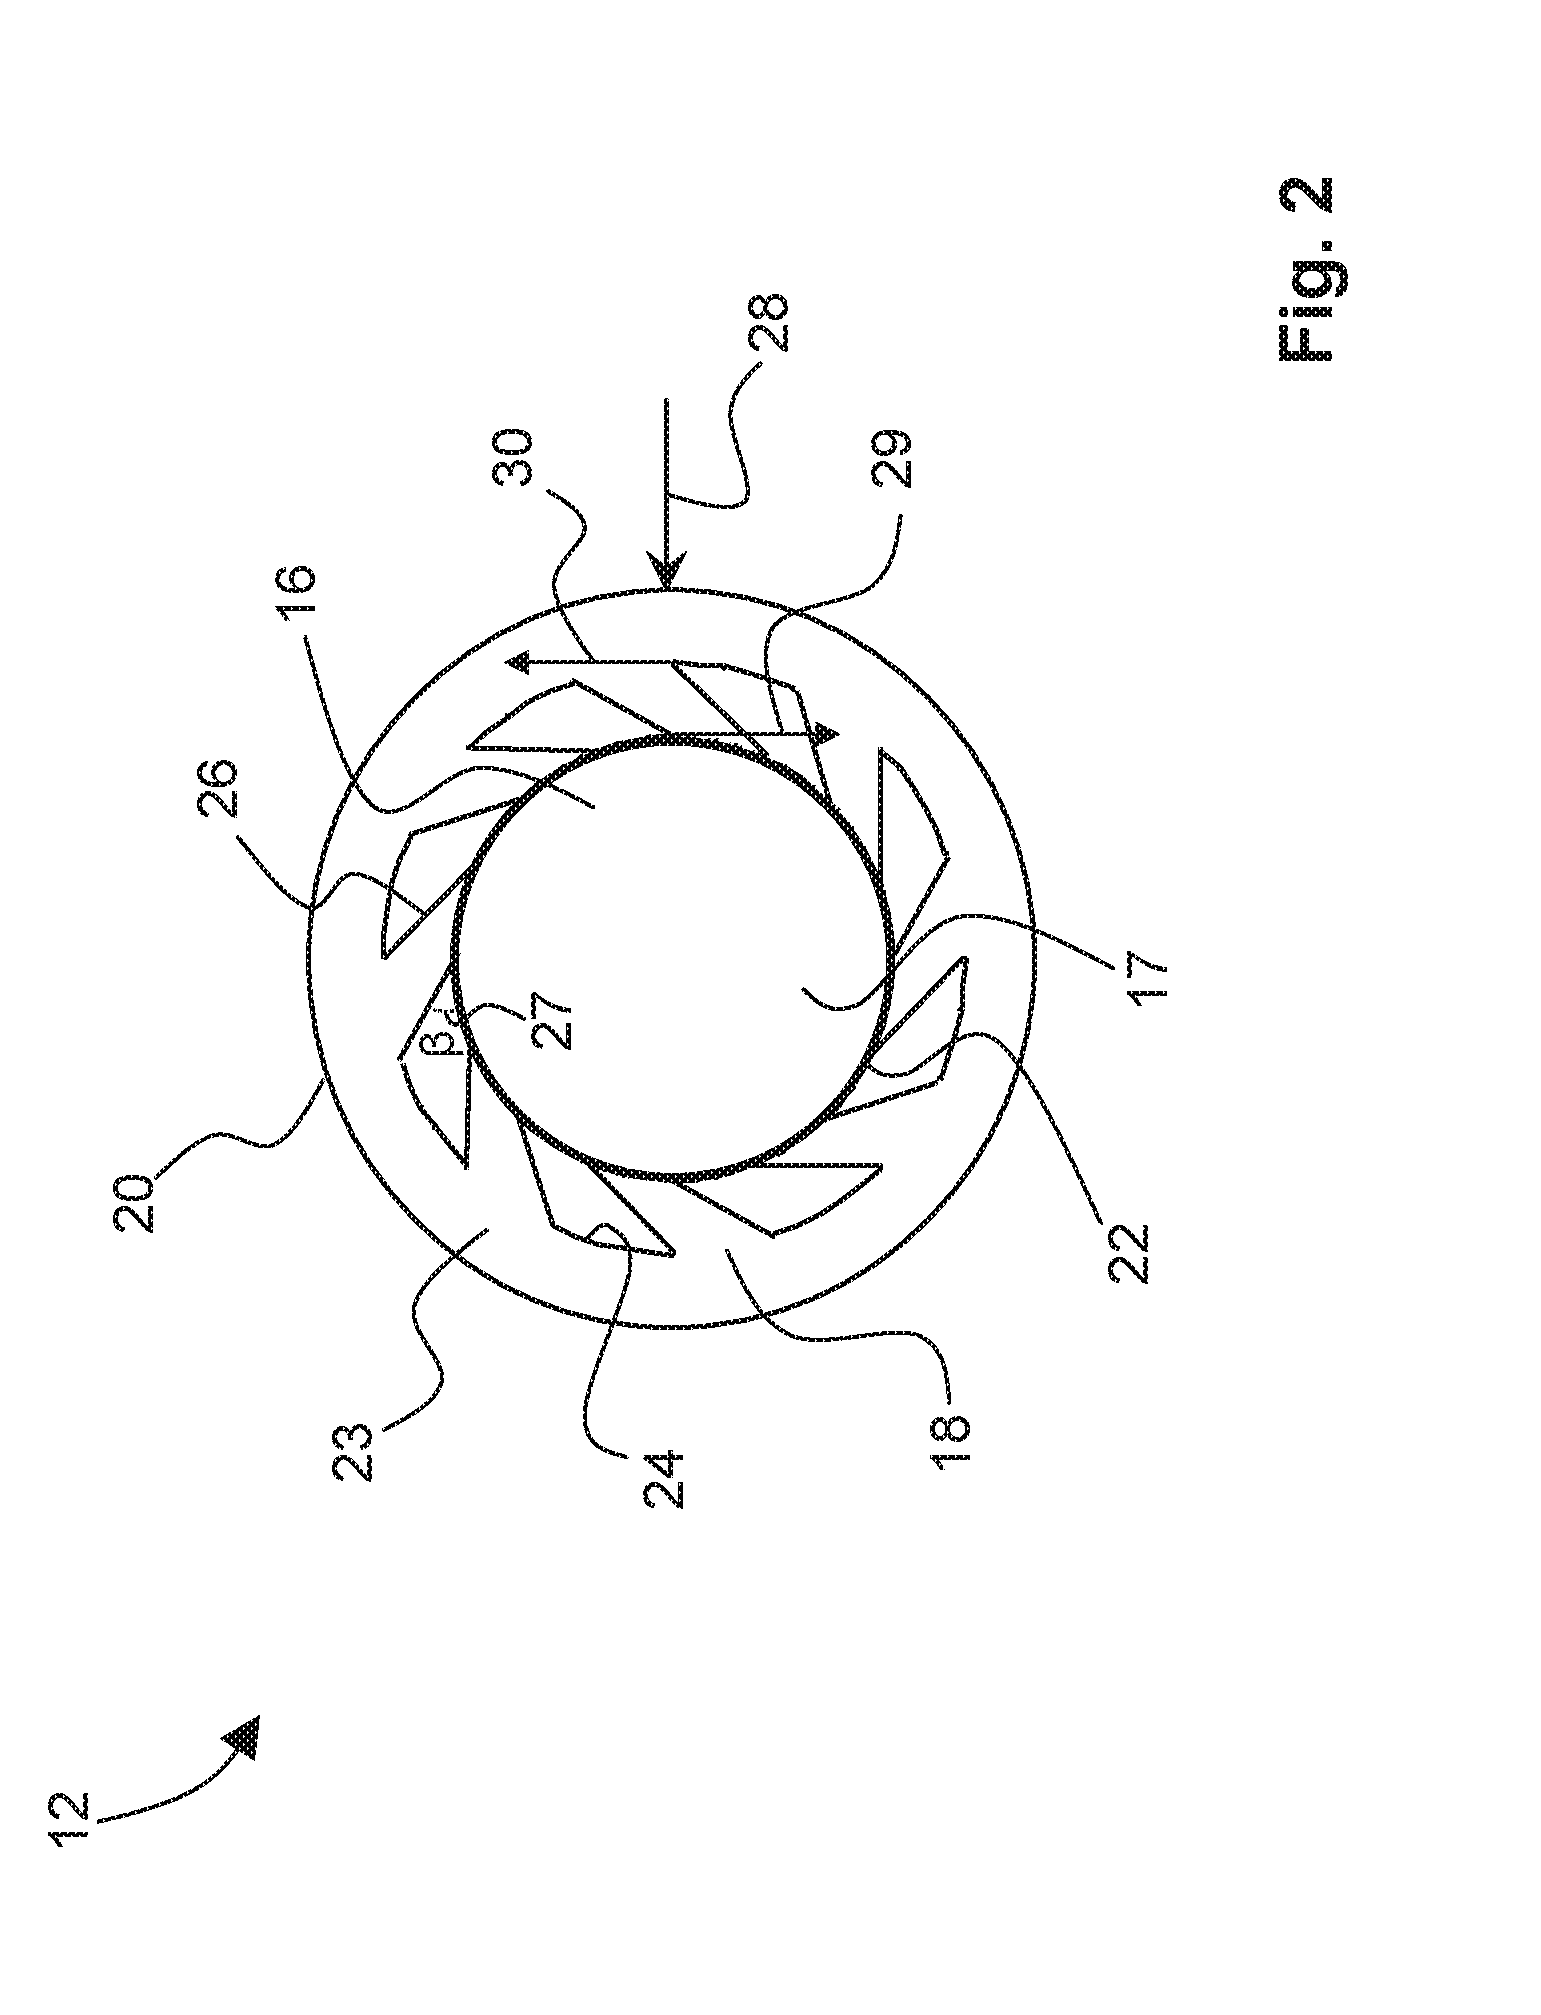 Transversal load insensitive optical waveguide, and optical sensor comprising a wave guide